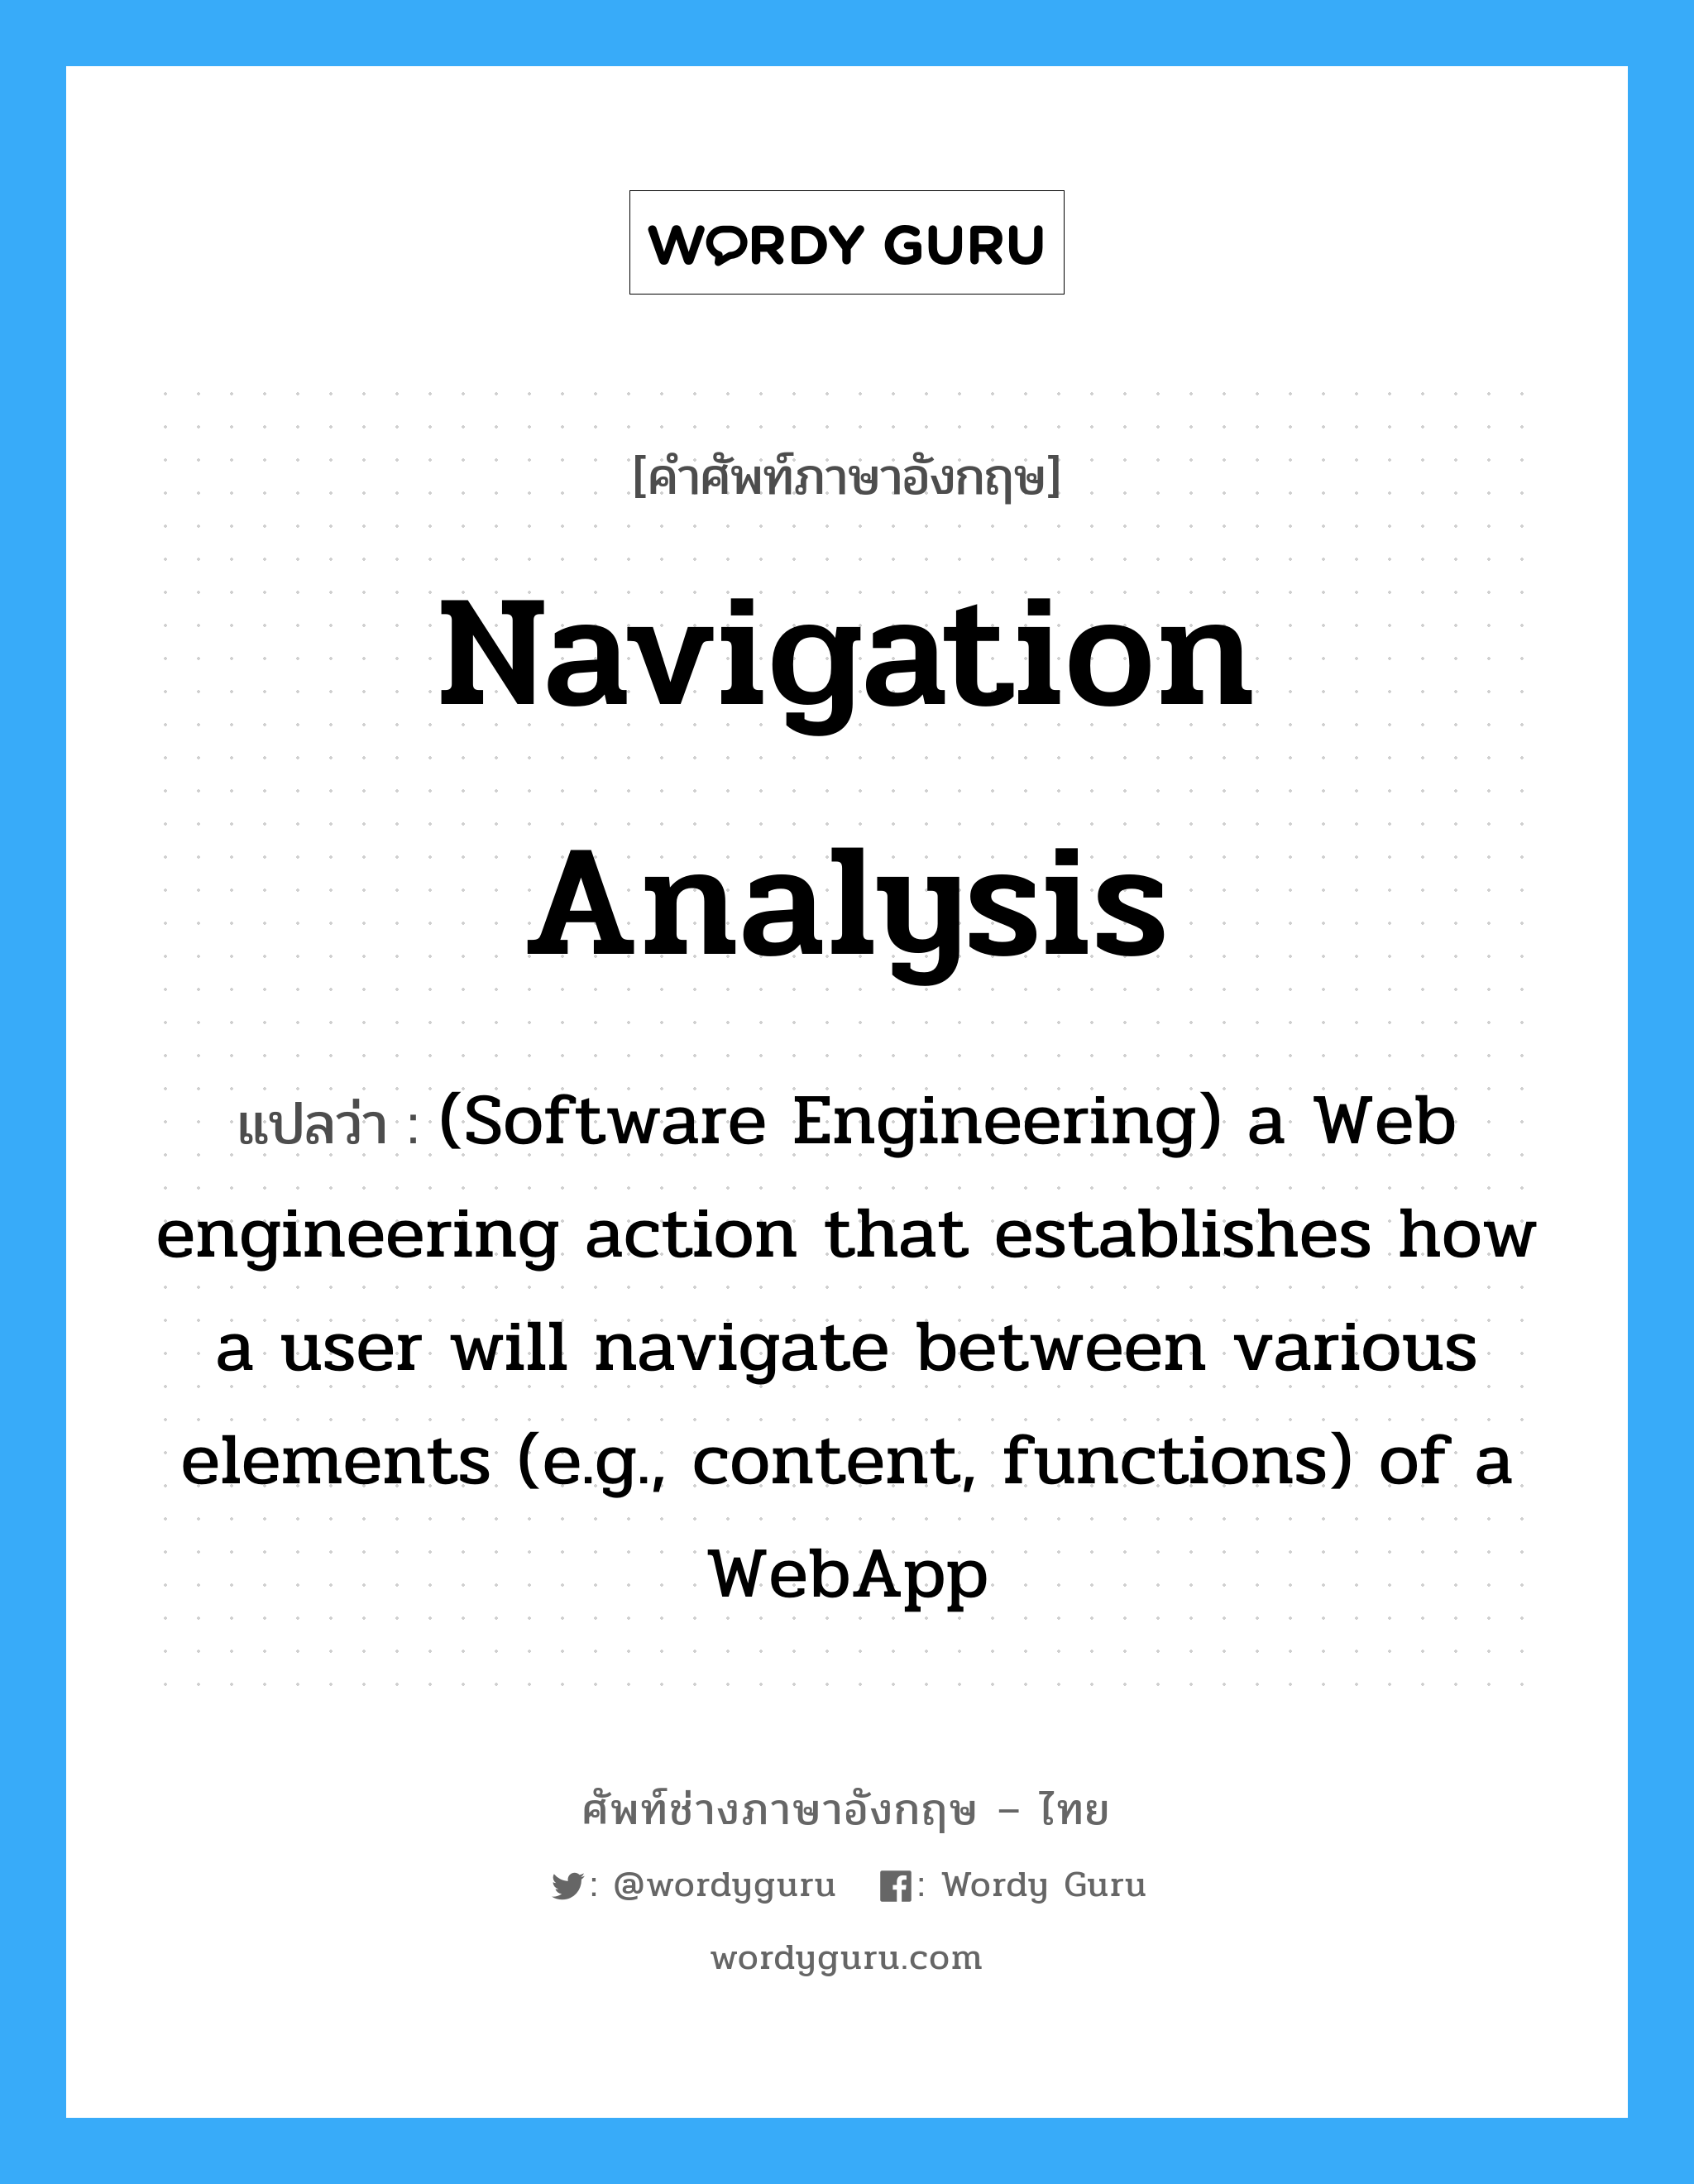 Navigation analysis แปลว่า?, คำศัพท์ช่างภาษาอังกฤษ - ไทย Navigation analysis คำศัพท์ภาษาอังกฤษ Navigation analysis แปลว่า (Software Engineering) a Web engineering action that establishes how a user will navigate between various elements (e.g., content, functions) of a WebApp